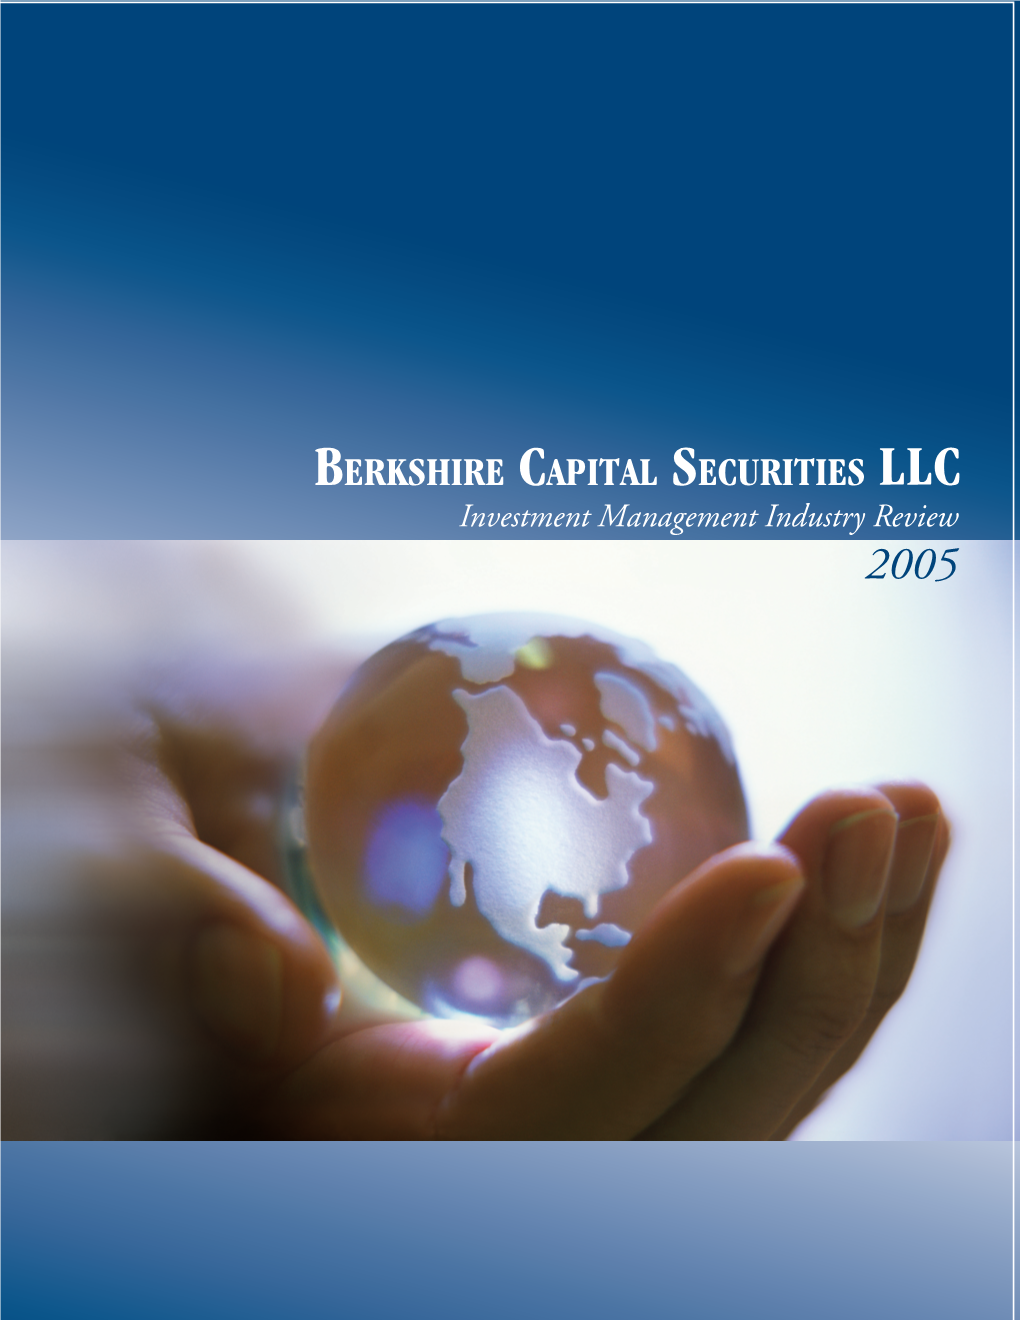 Investment Management Industry Review 2005 Management Investment T BERKSHIRE CAPITAL SECURITIES UK LTD BERKSHIRE CAPITAL SECURITIES LLC P Private Vehicles Like Iras